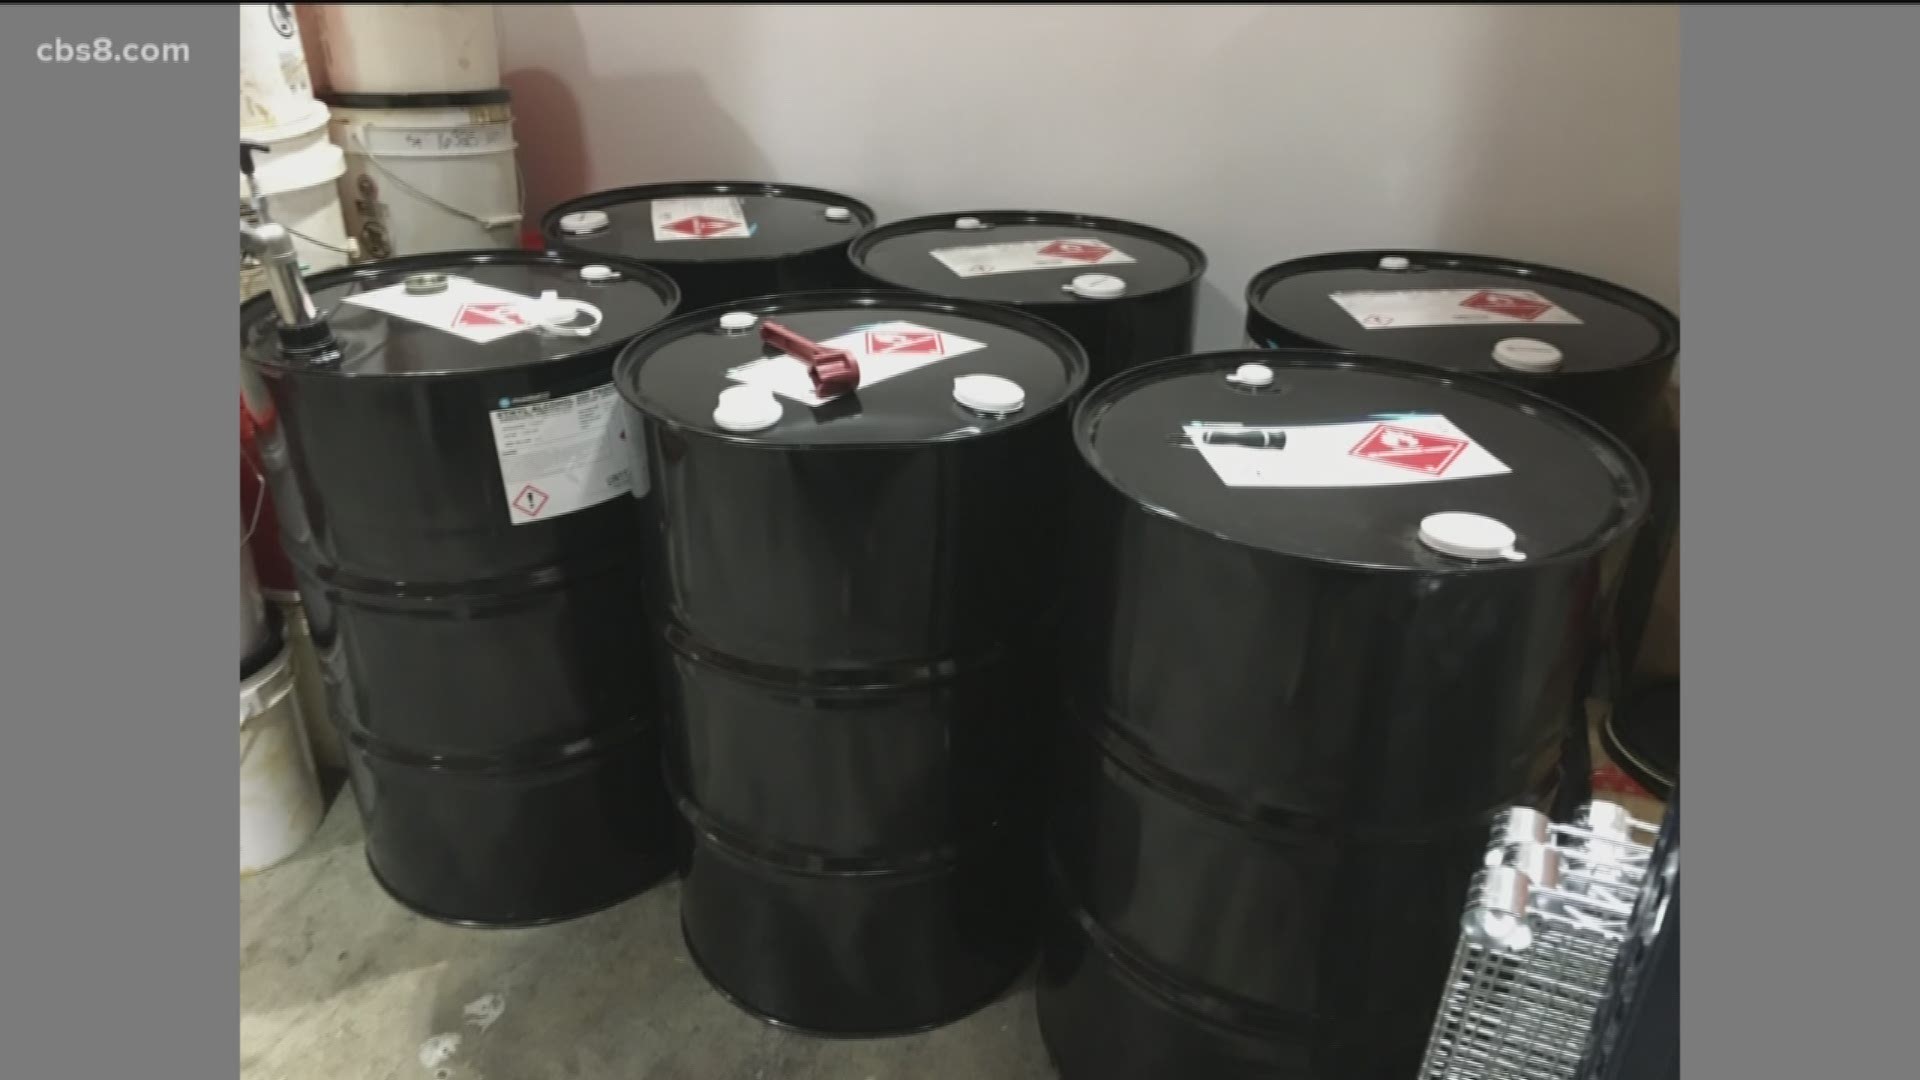 Authorities said it was the sixth hash oil lab in San Diego County dismantled by federal authorities within the past three weeks.